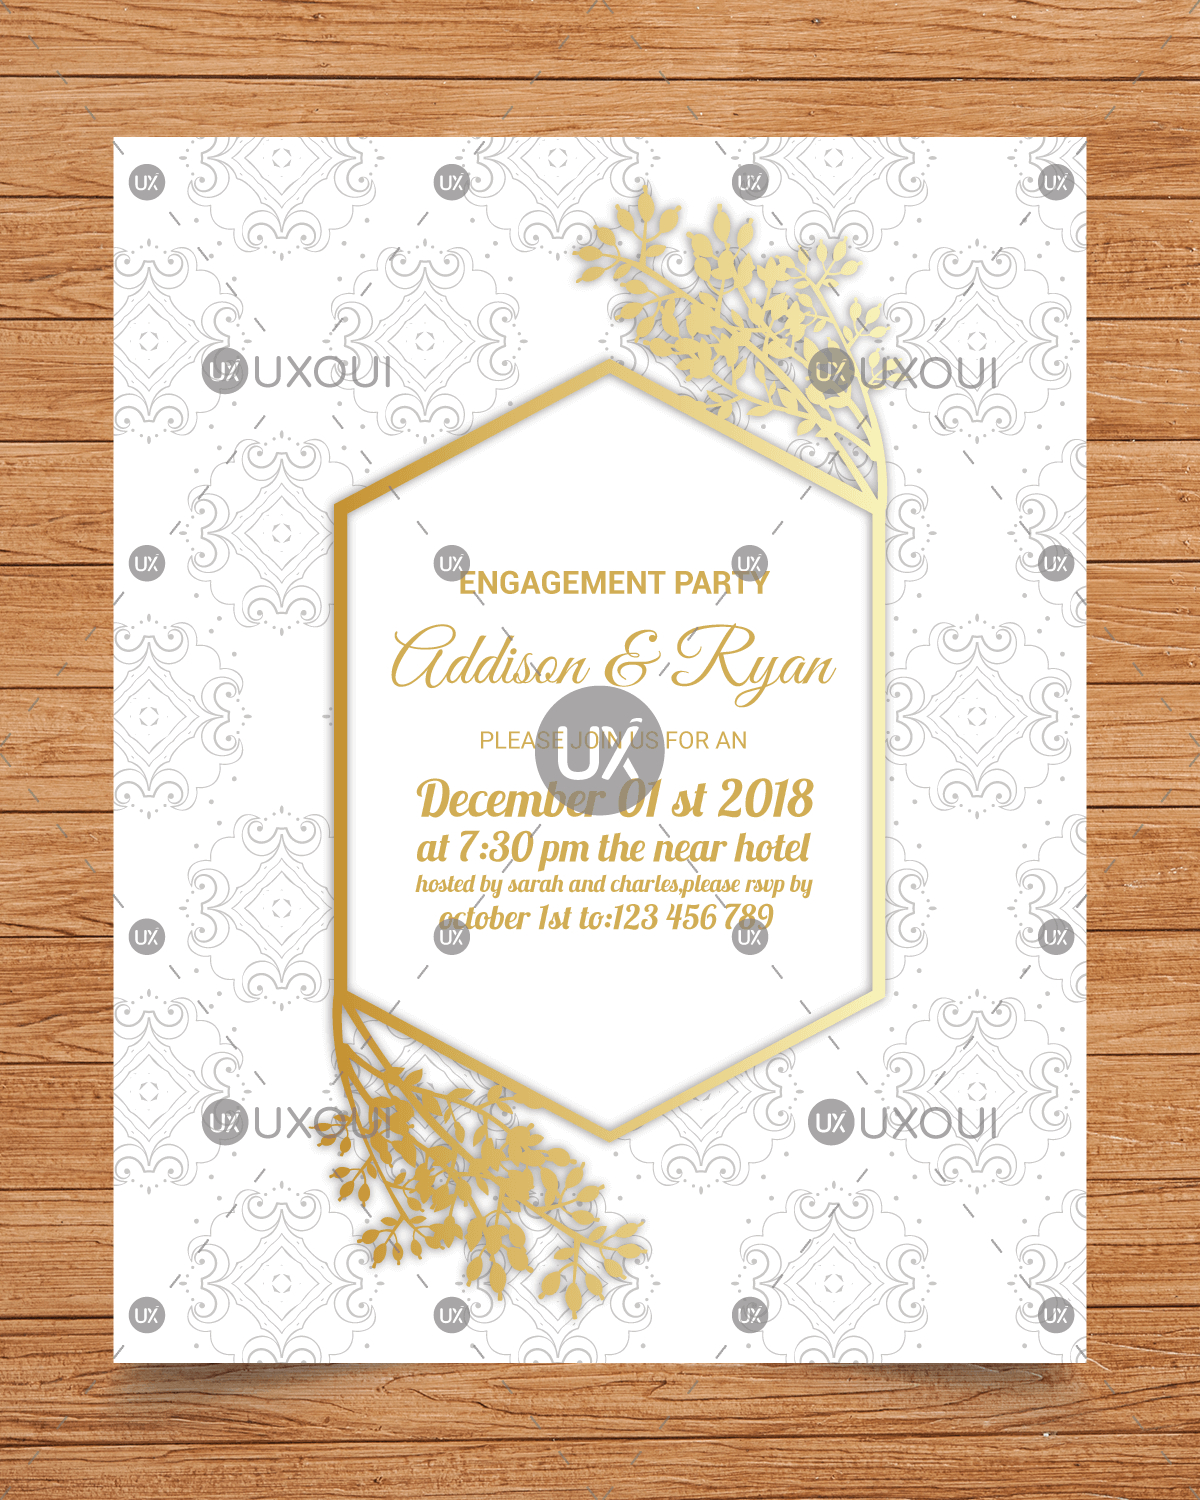 Wedding Engagement Party Invitation Card Template Design Vector With Flowers For Engagement Invitation Card Template